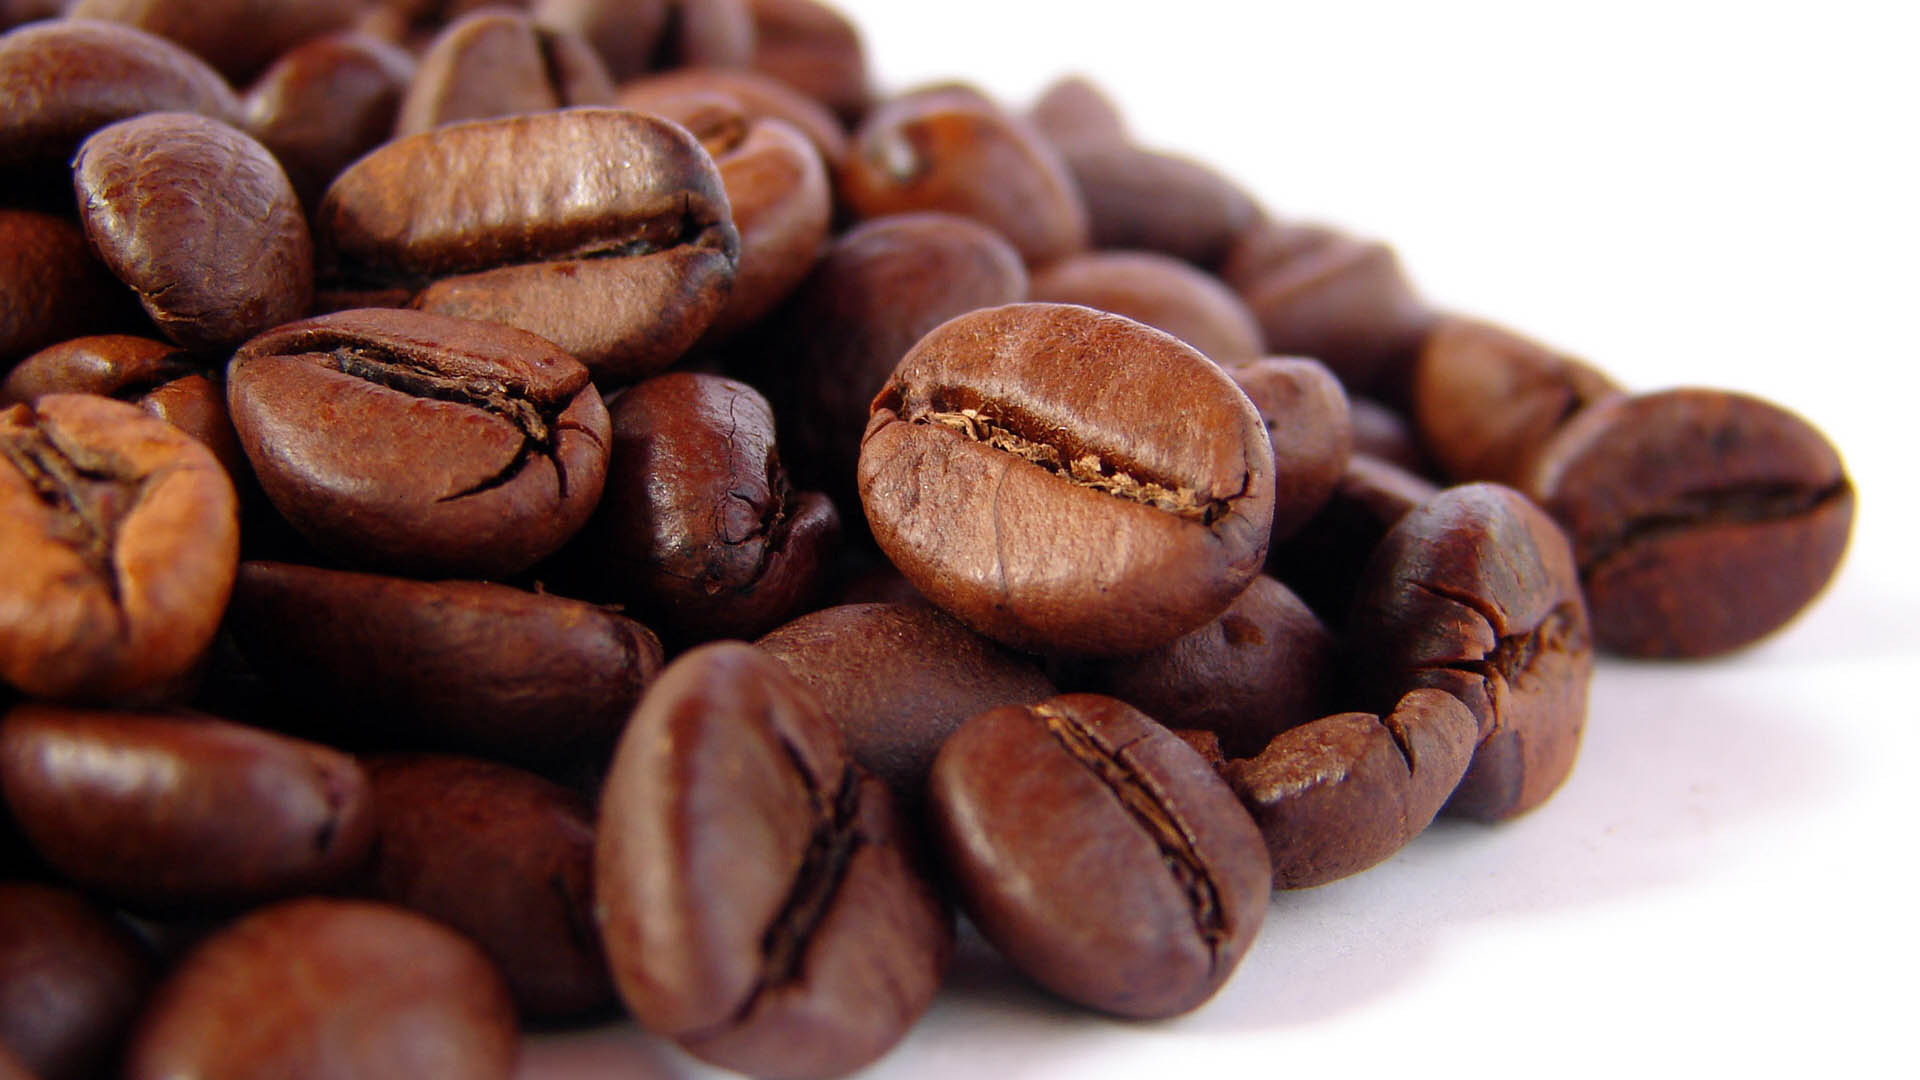 Hd Images Of Coffee Beans - HD Wallpaper 